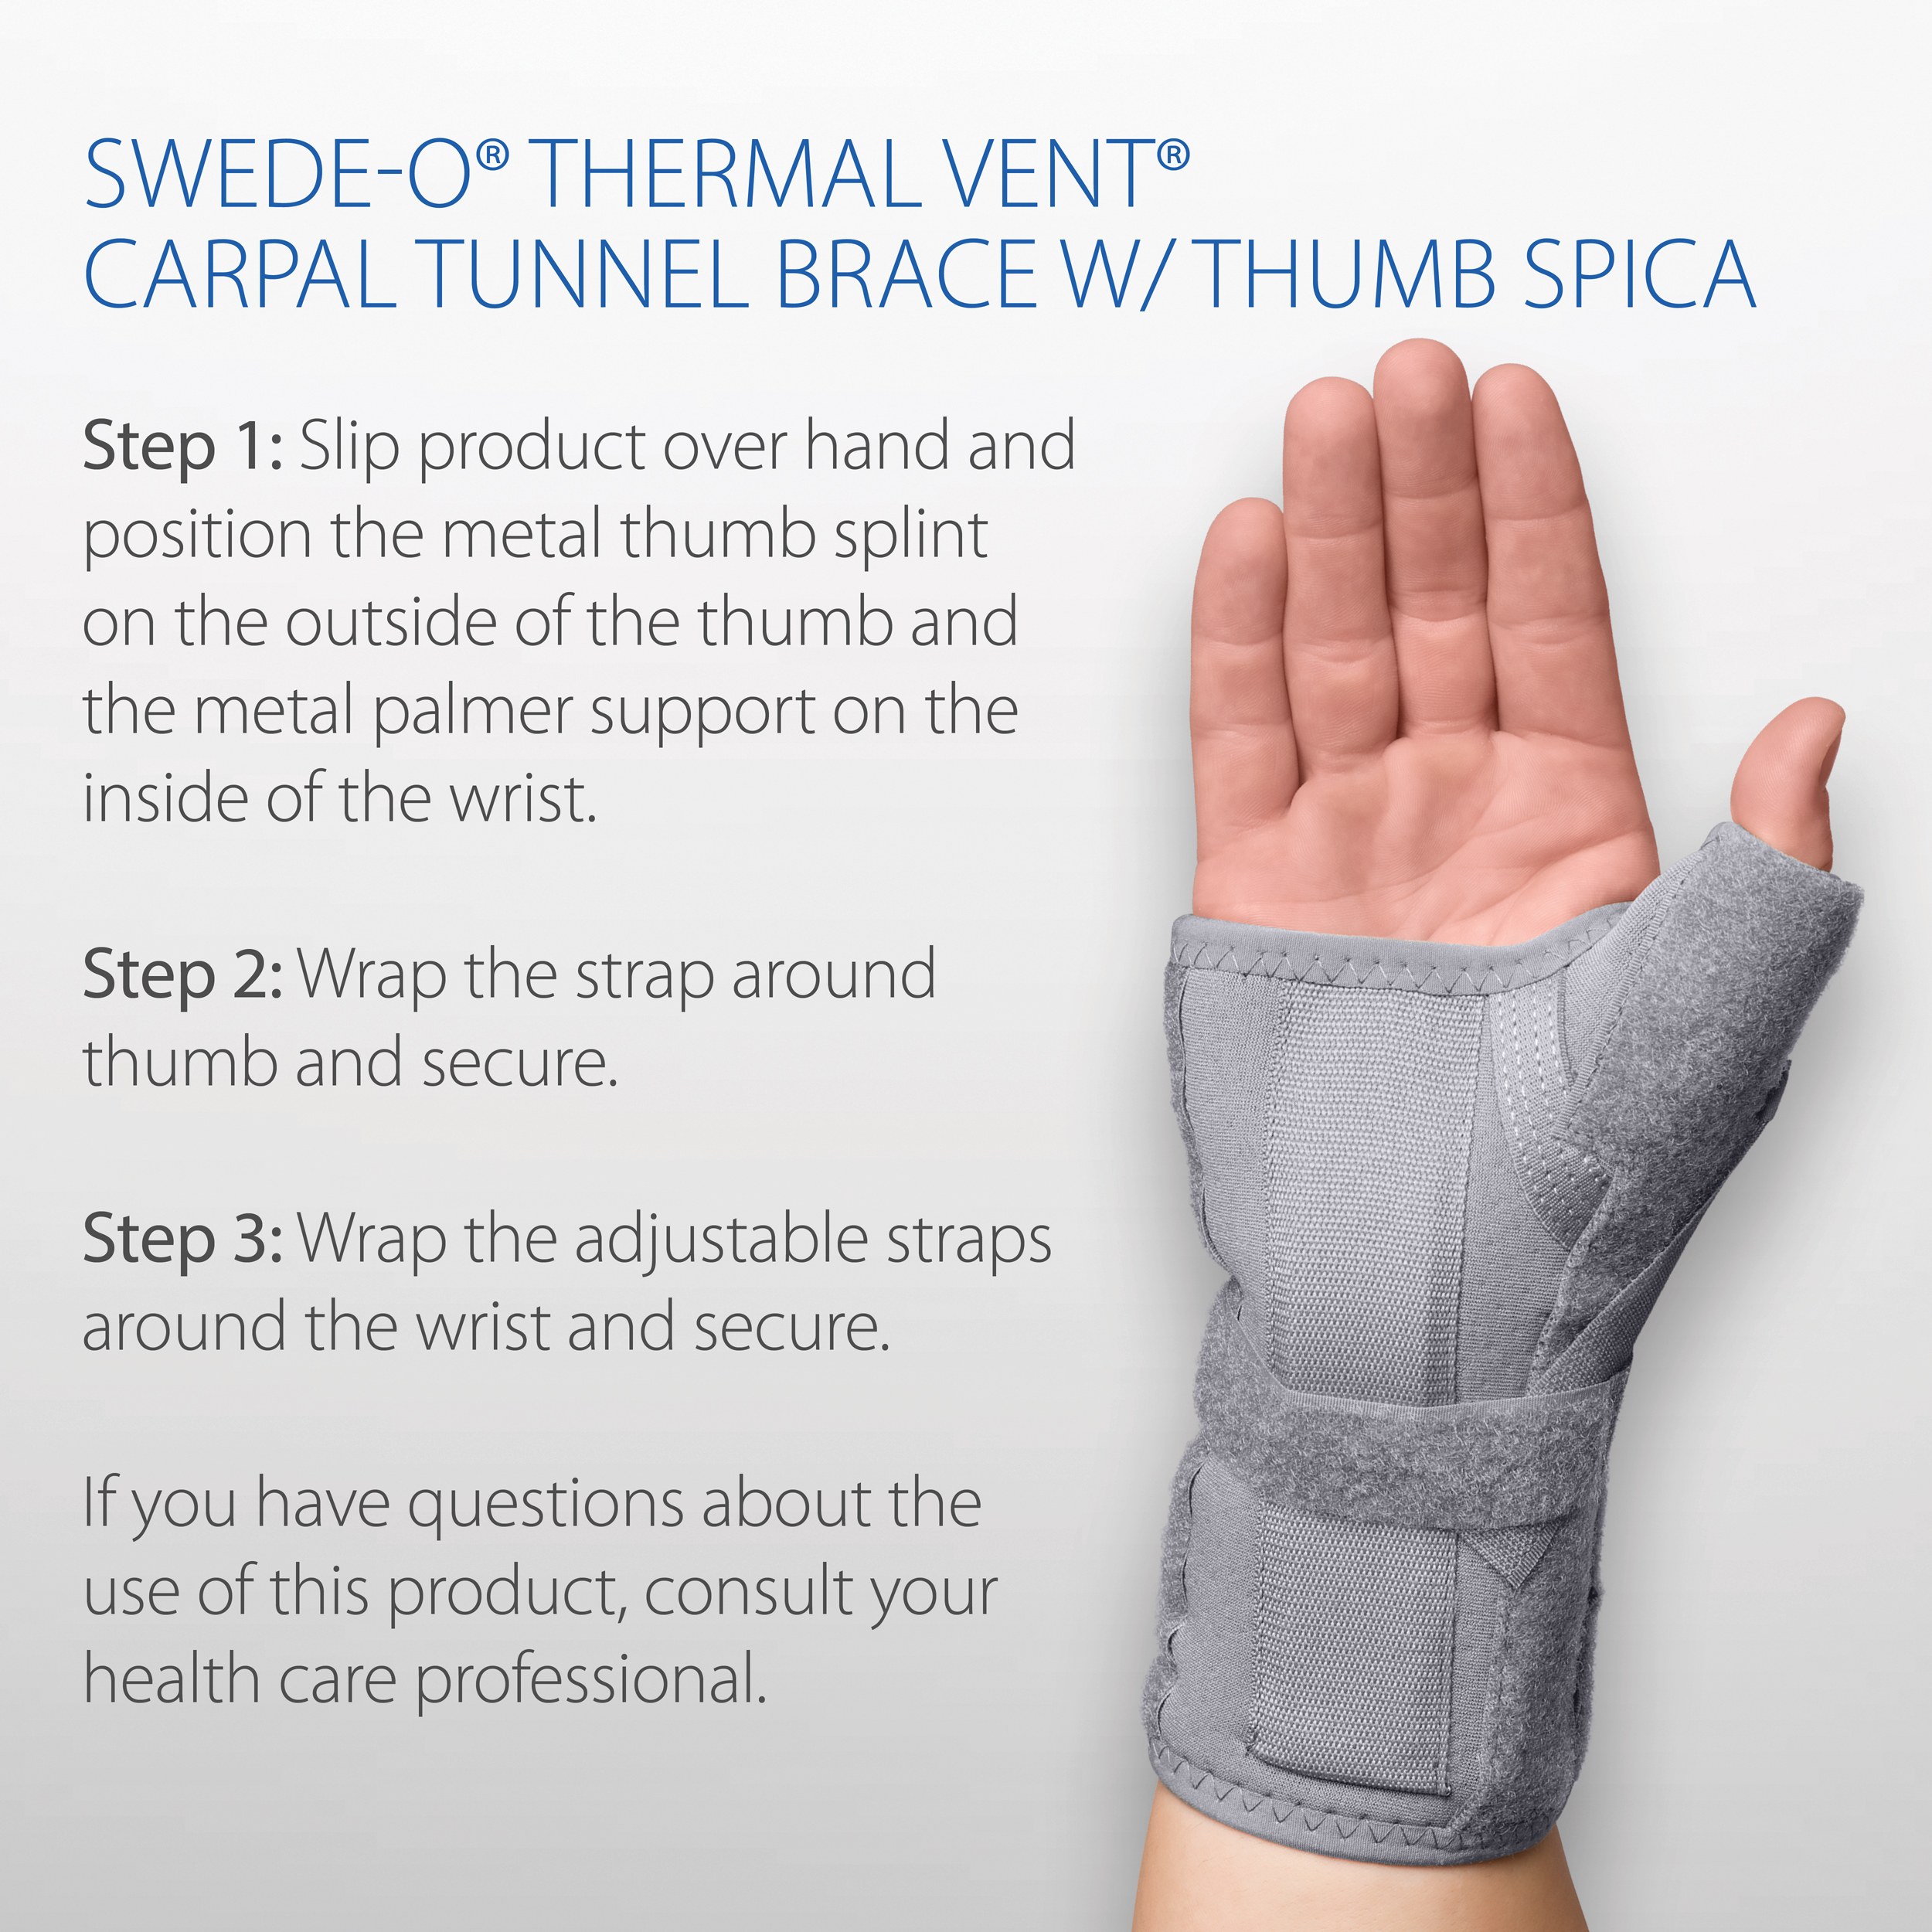 Swede-O Thermal Vent Adjustable Carpal Tunnel Brace with Thumb Spica